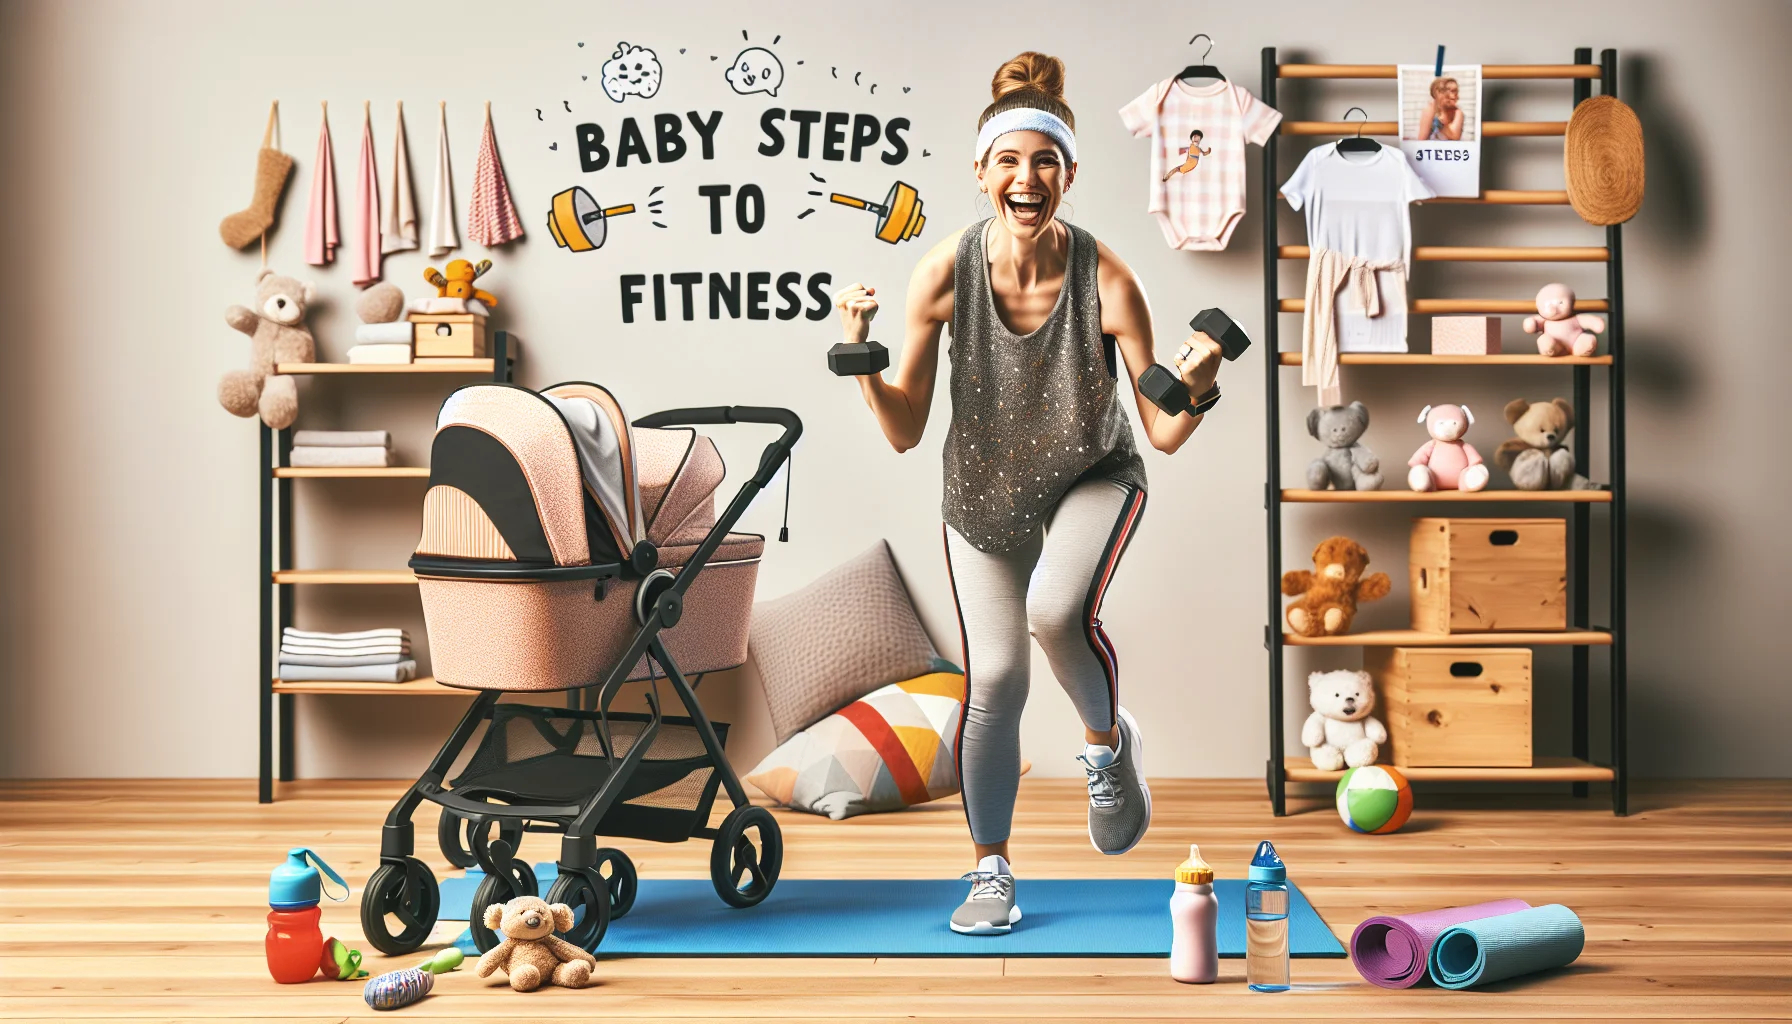 Picture this: a setting mimicking a home gym with various baby essentials cleverly integrated. There's a Caucasian female, an active mom who embodies determination and focus, laughing heartily as she lifts a baby stroller with one hand, symbolising a weight. On the other side, a baby bottle serves as her water bottle. An exercise mat has soft toys at various positions as if marking exercise spots. An athletic outfit, sweatbands, and a baby carrier add to her workout gear. Encouraging text that says 'Baby Steps To Fitness' hovers above them, adding a humorous element to the scene.